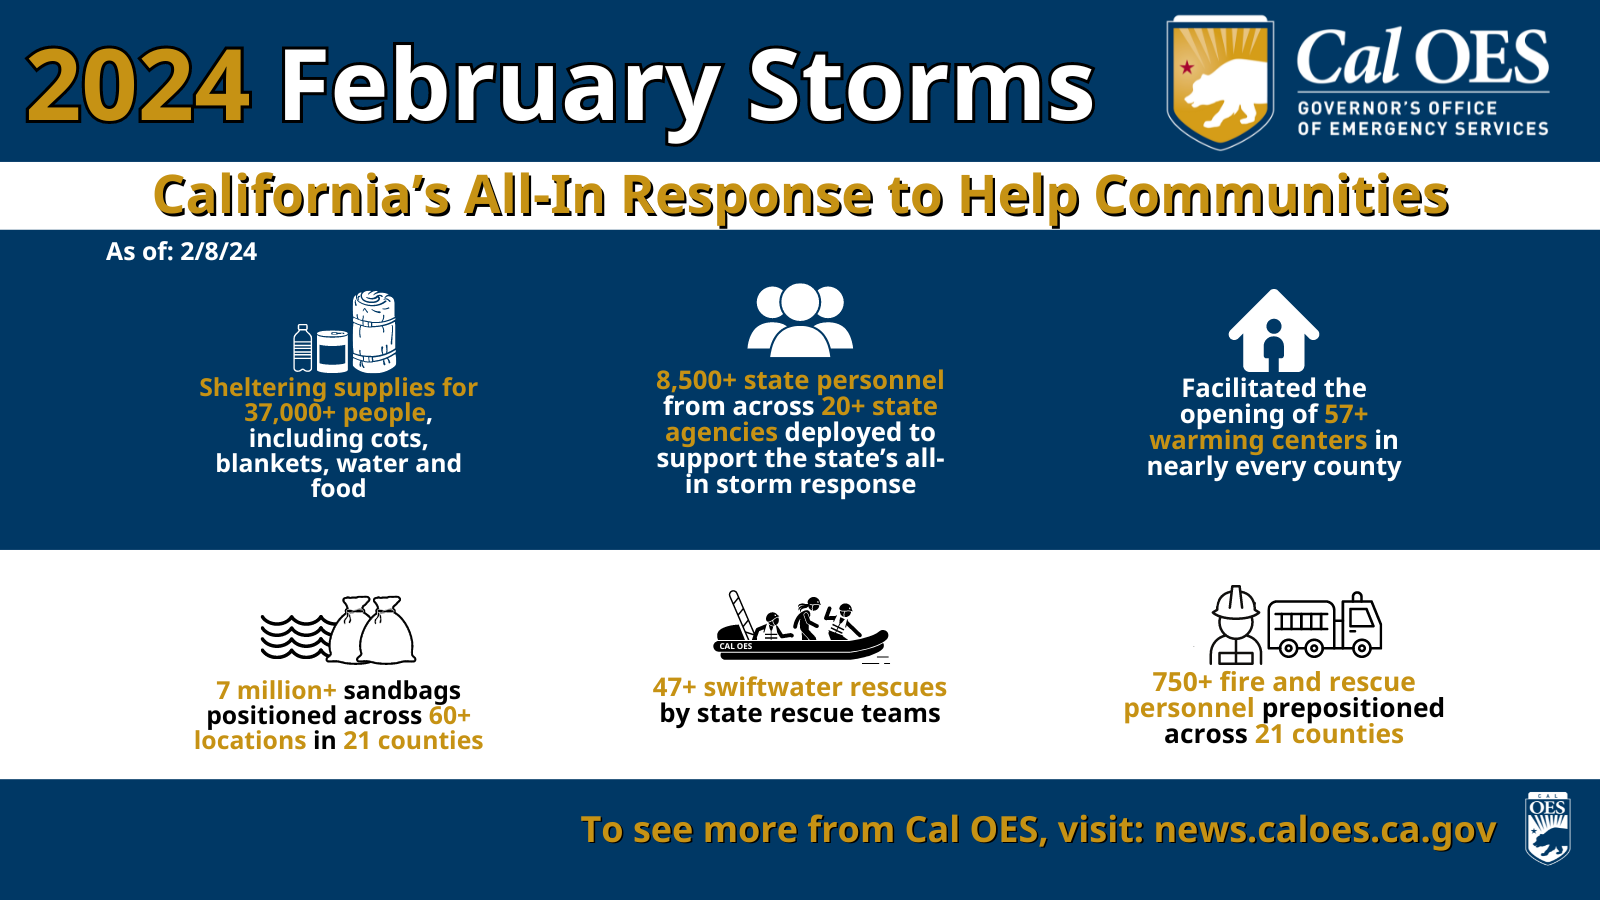 A graphic reading, "2024 February Storms." A Cal OES Logo in the top right. The graphic continues to read, "California's All-In Response to Help Communities. As of 2/8/24. Sheltering supplies for 37,000+ people, including cots, blankets, water and food. 8,500+ state personnel from across 20+ state agencies deployed to support the state's all-in storm response. Facilitates the opening of 57+ warming centers in nearly every county. 7 million+ sandbags positioned across 60+ locations in 21 counties. 47+ swiftwater rescues by state rescue teams. 750+ fire and rescue personnel prepositioned across 21 counties. To see more from cal OES, visit: News dot caloes dot C A  dot gov